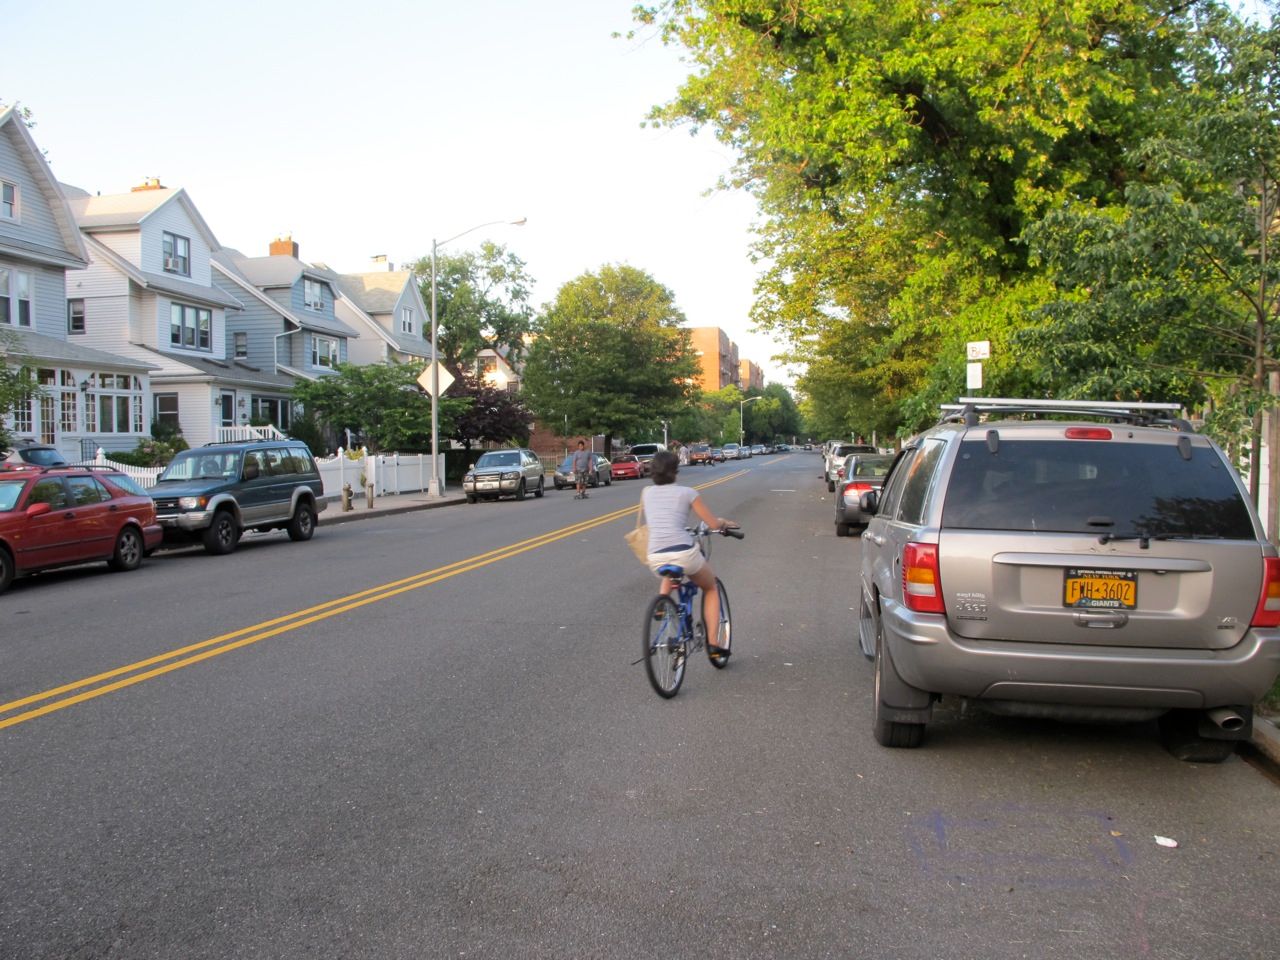 CB 12 Transportation Committee To Review DOT’s Albemarle Road Safety Plan